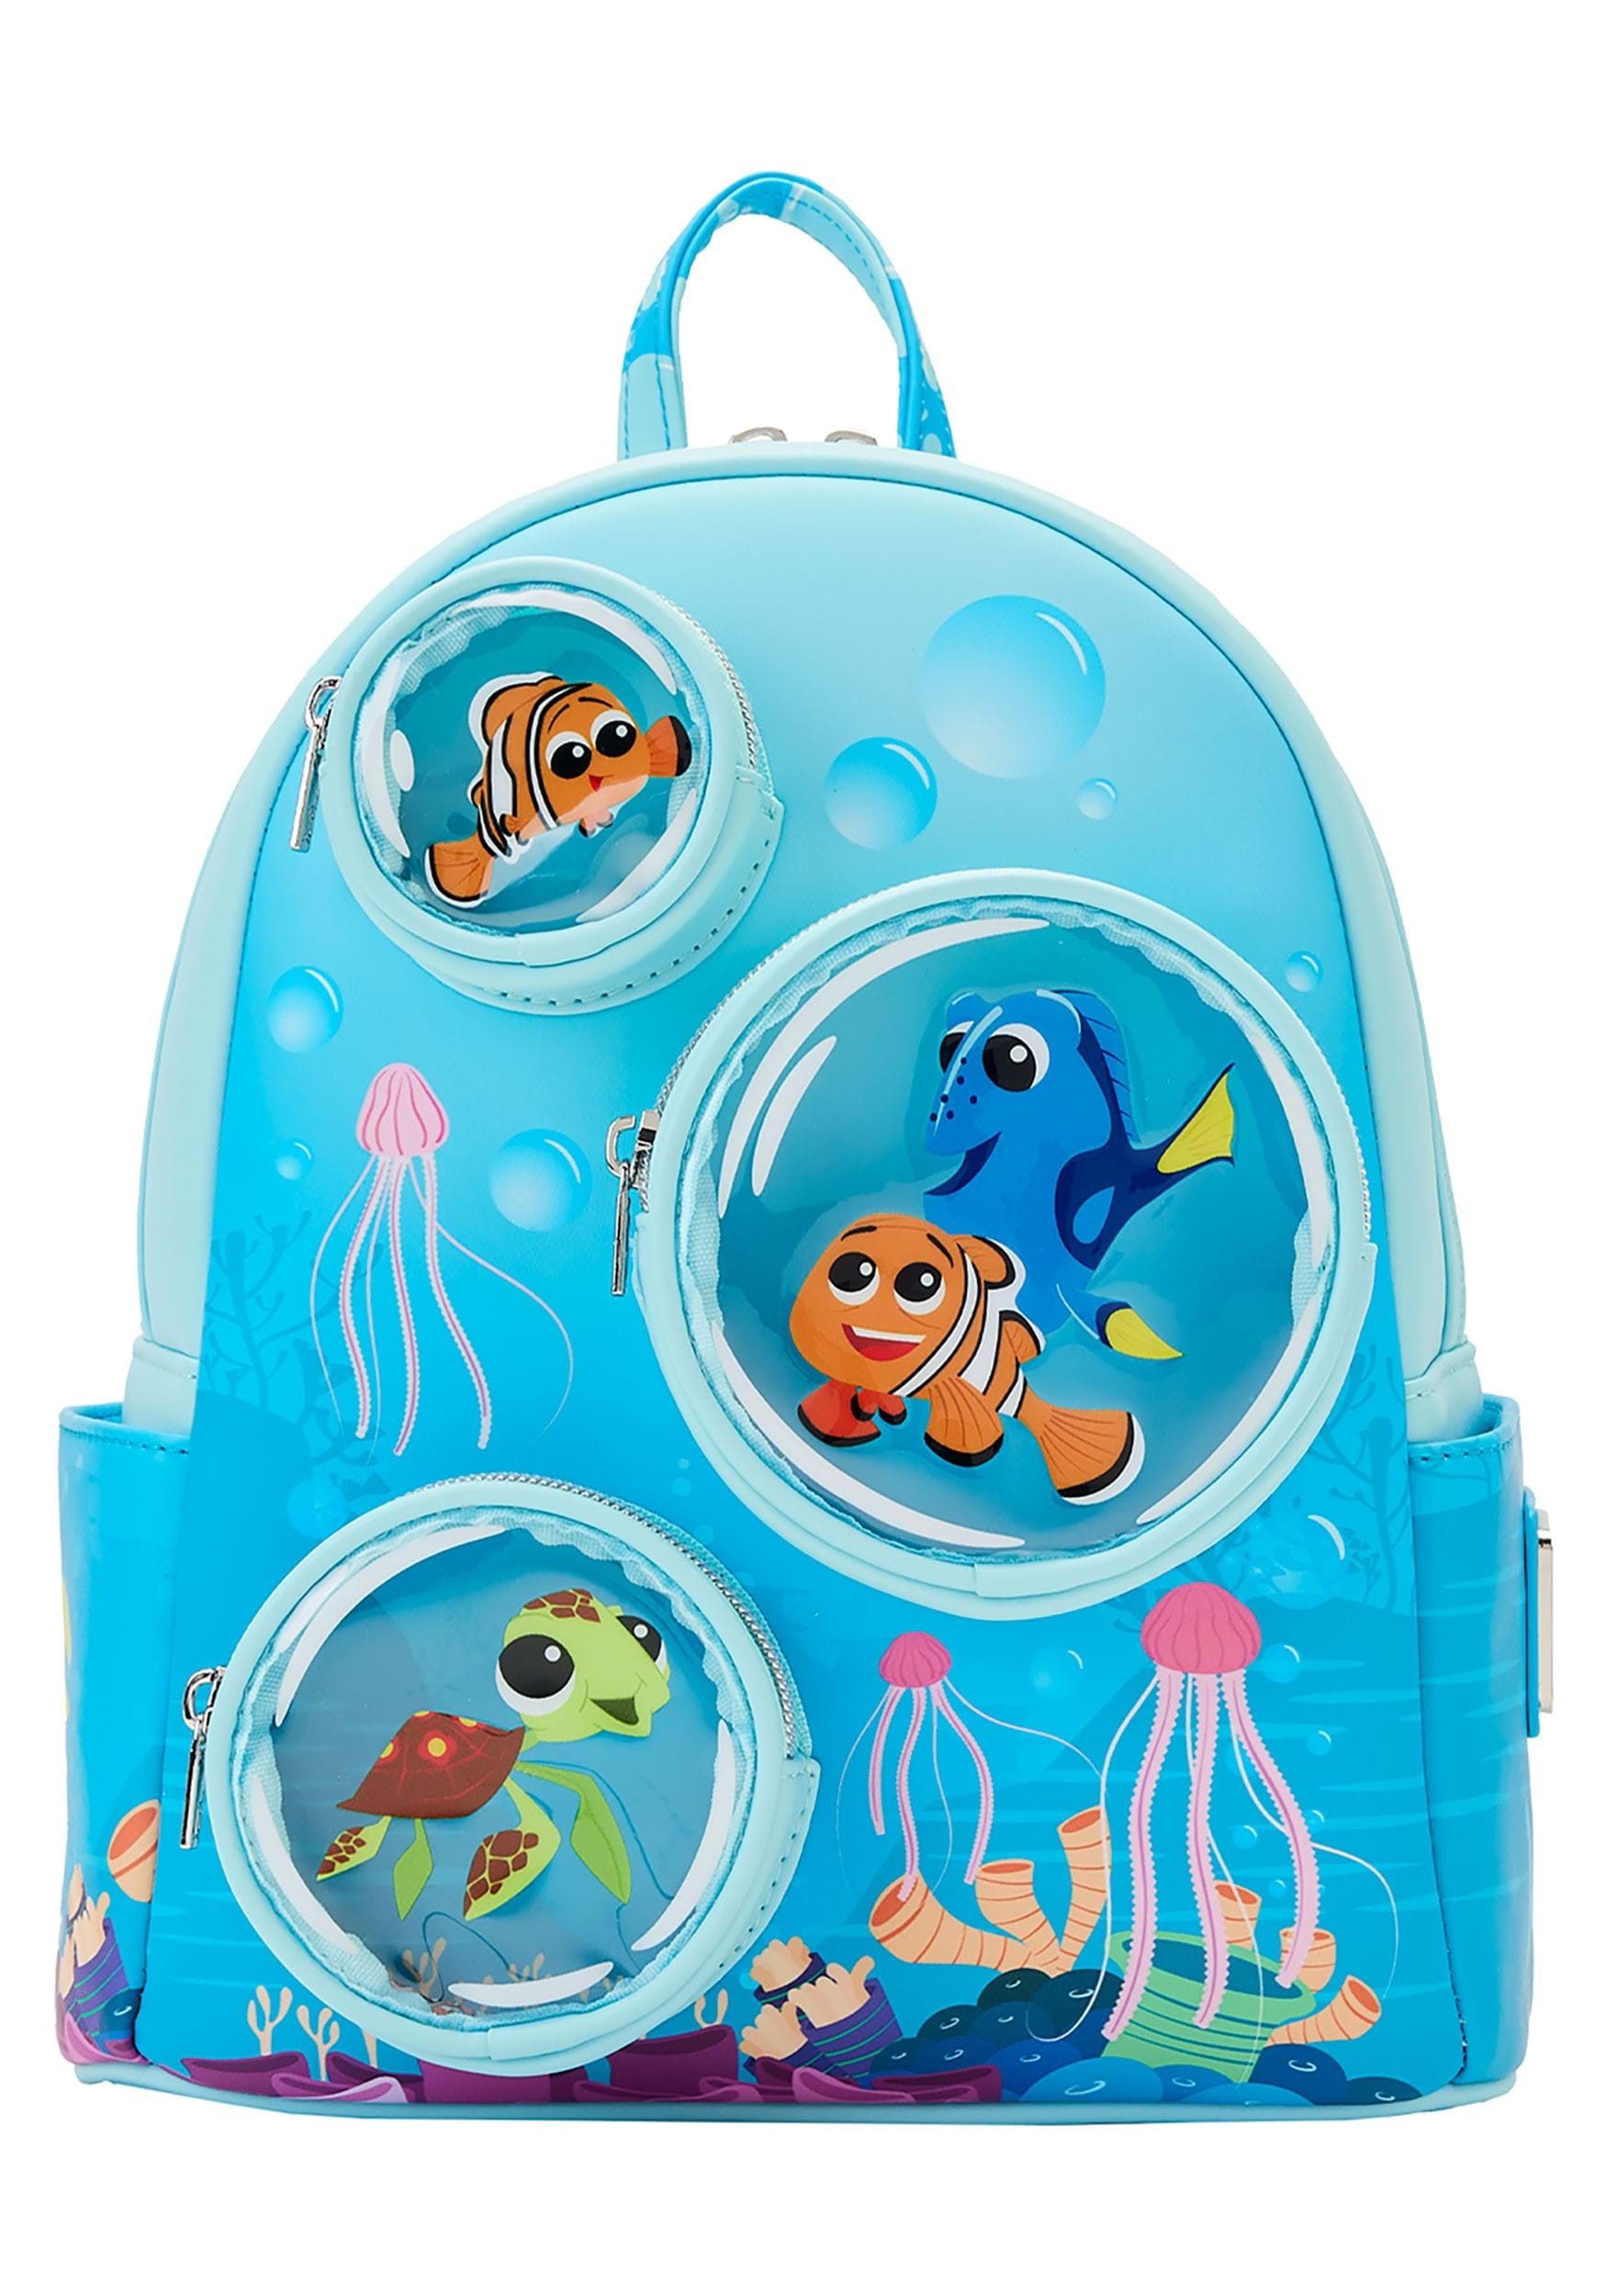 Finding Nemo 20th Anniversary Bubble Pocket Loungefly Mini Backpack